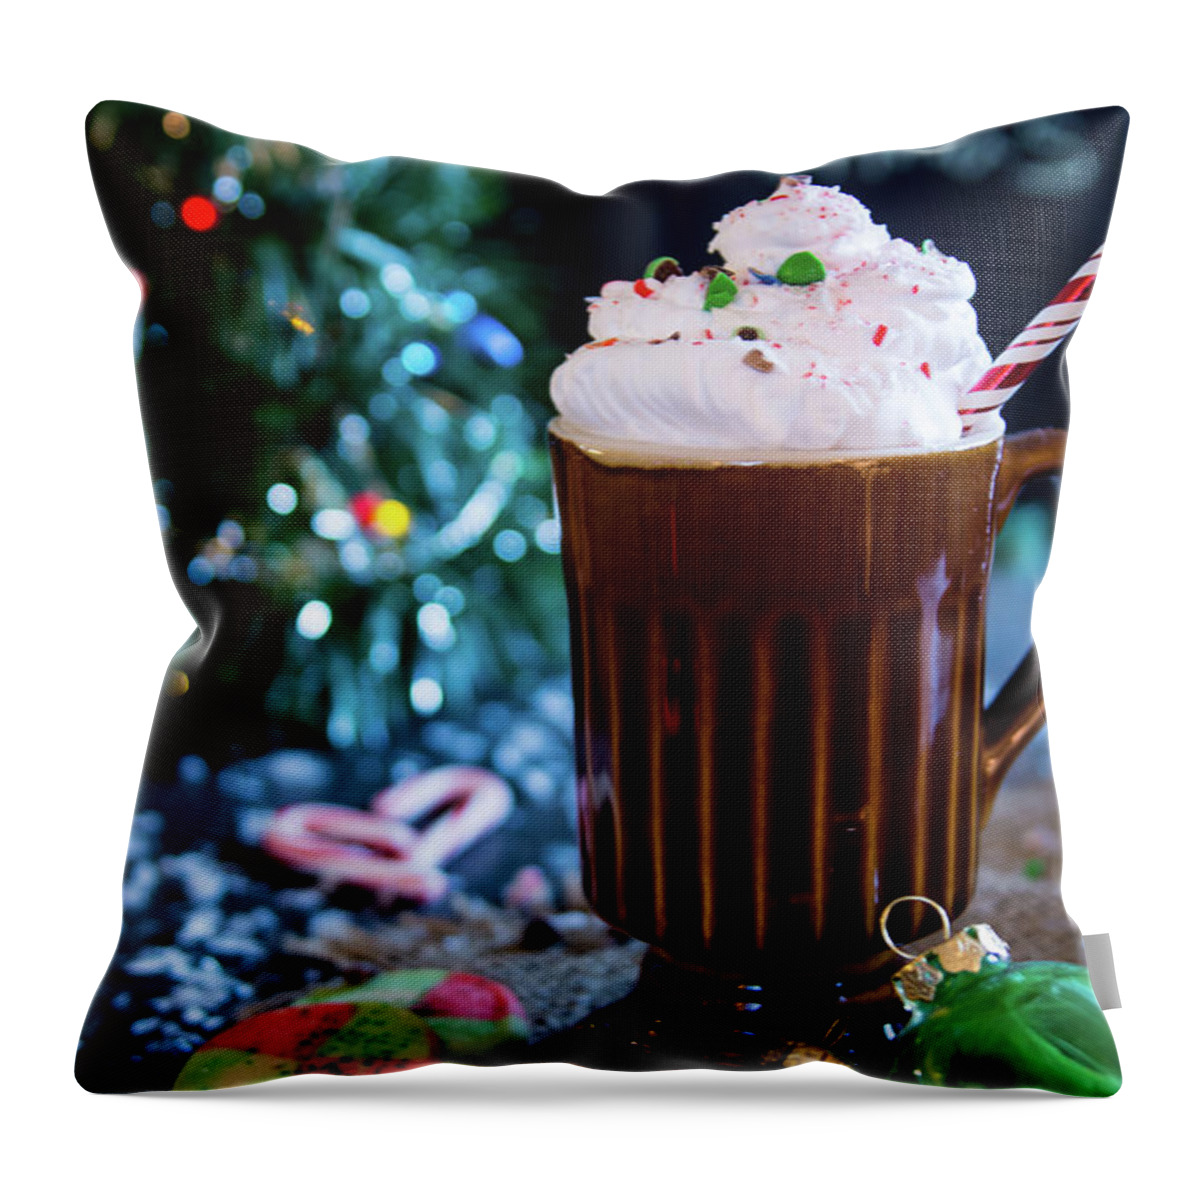 Food Throw Pillow featuring the photograph Candy Cane Twist by Deborah Klubertanz